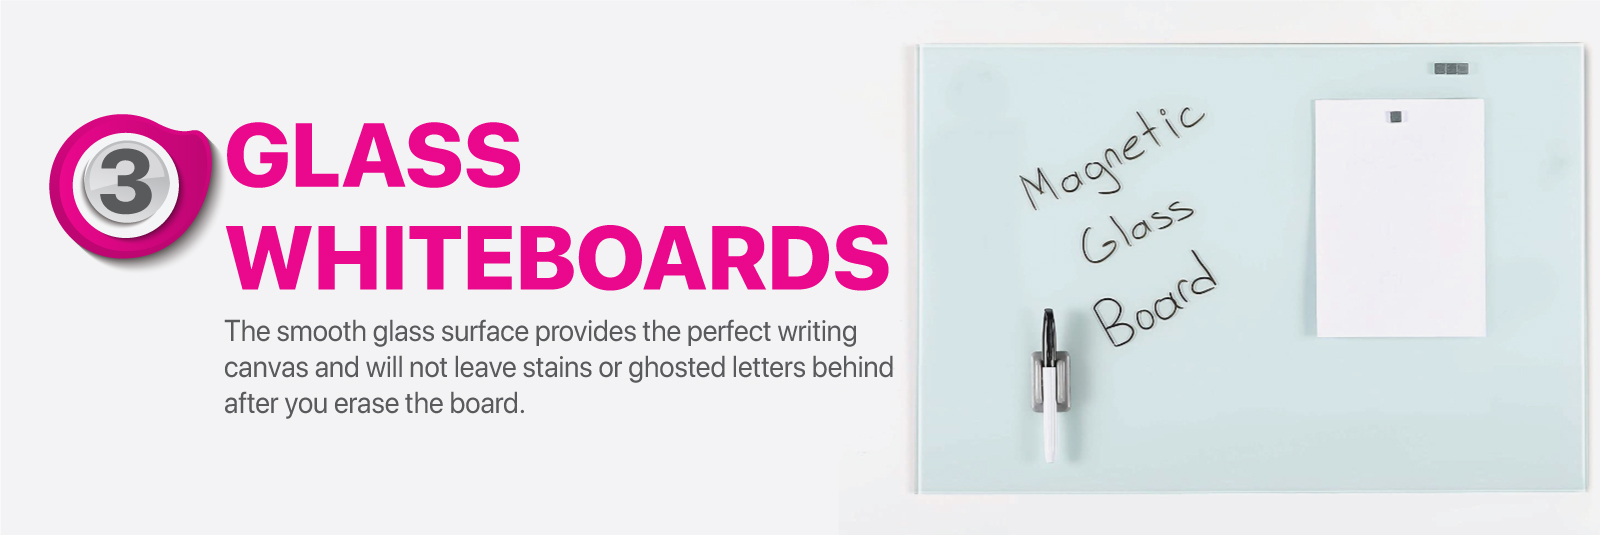 Glass whiteboards the smooth glass surface provides the perfect writing canvas and will not leave stains or ghosted letters behind after you erase the board.